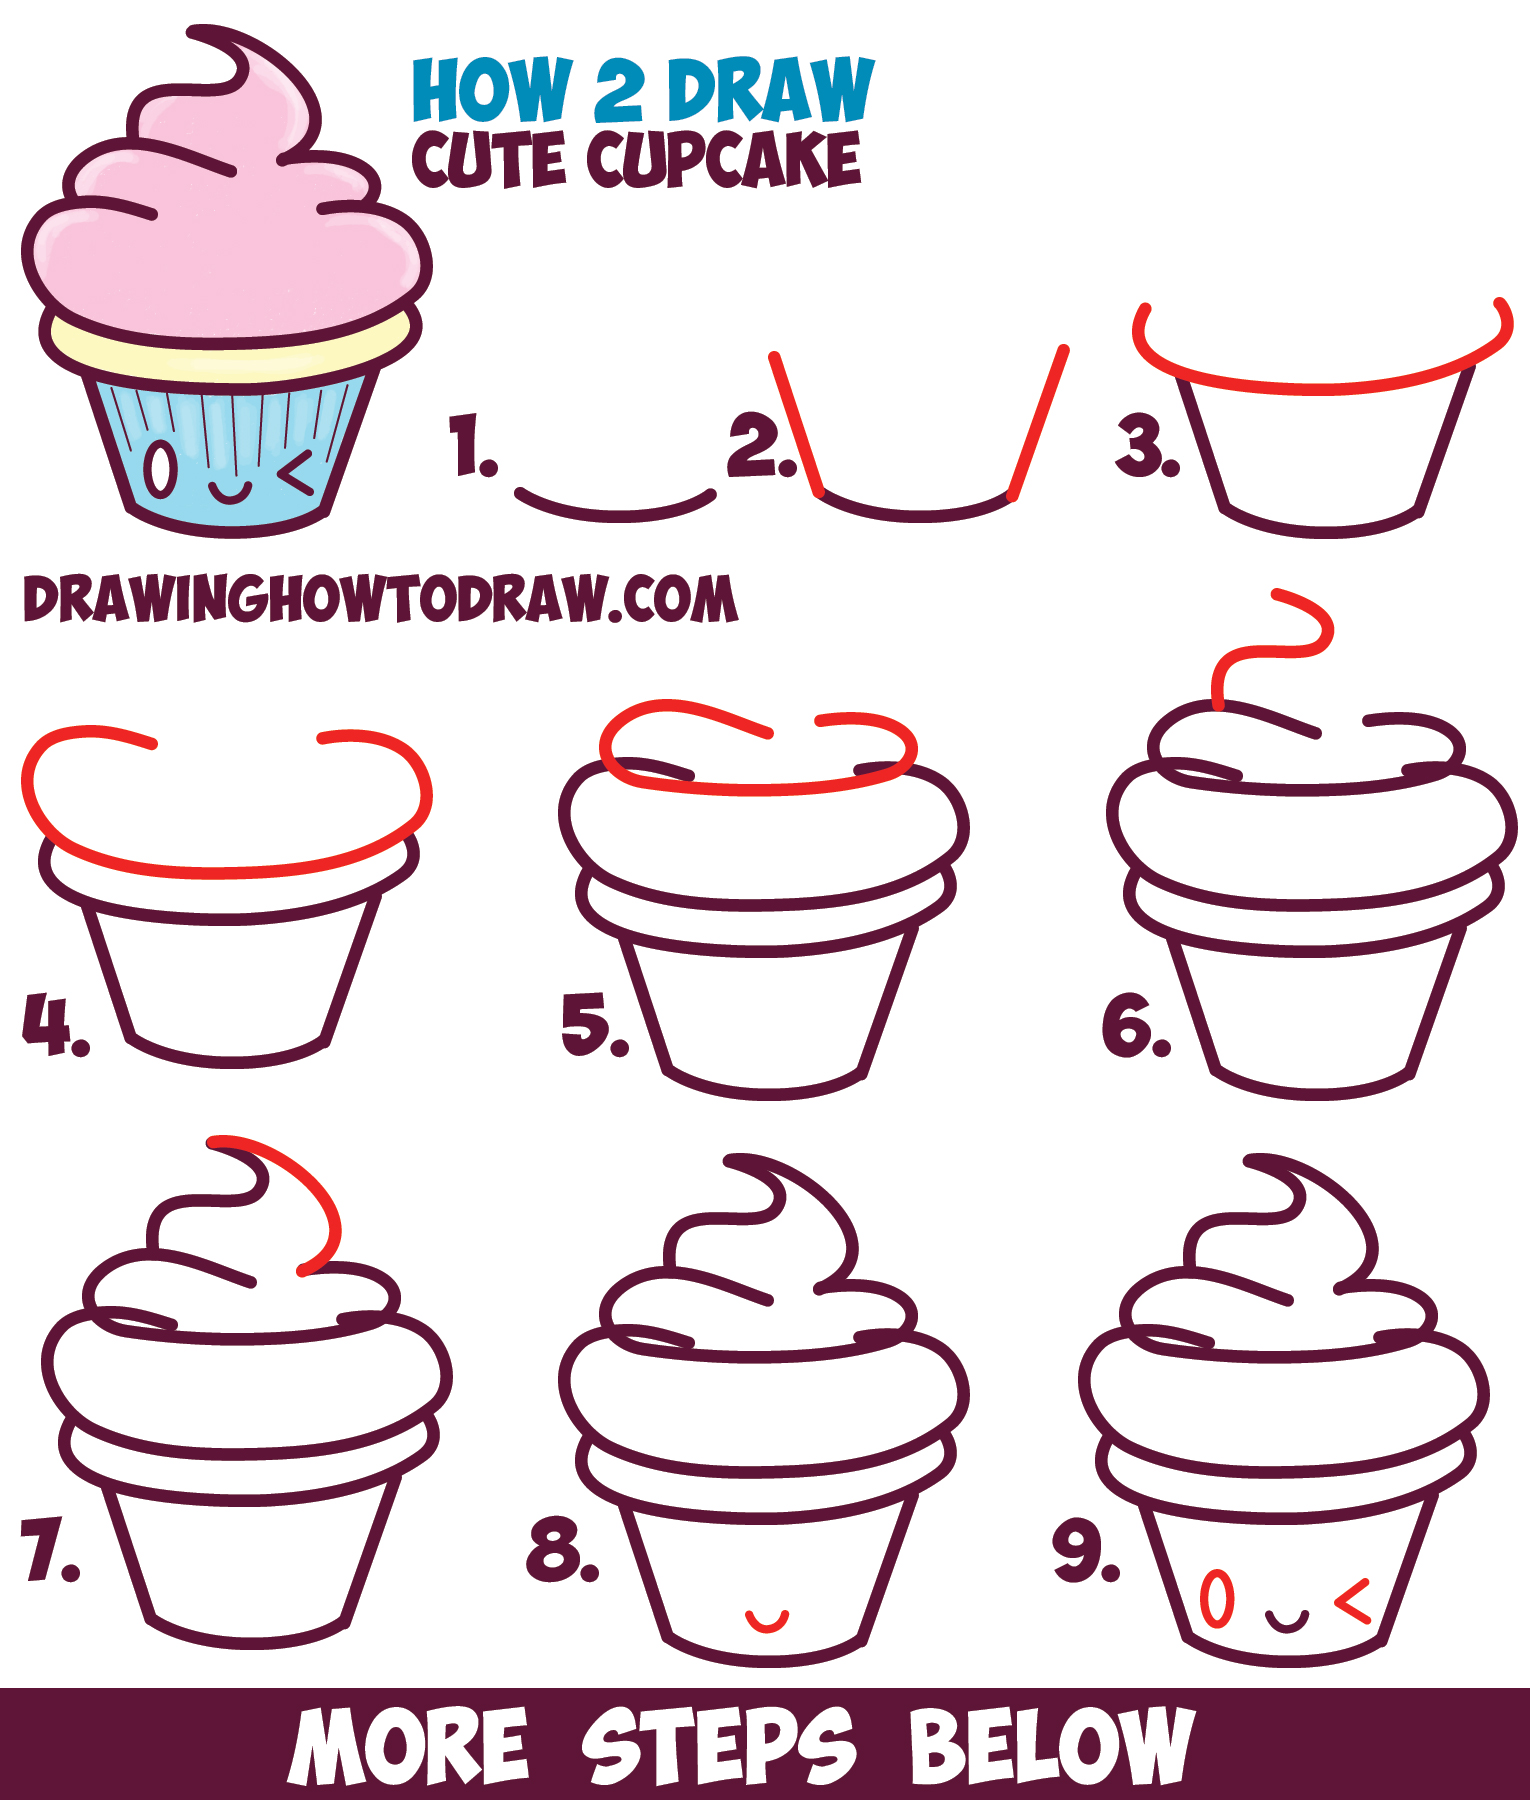 How to Draw Cute Kawaii Cupcake with Face on It Easy Step by Step